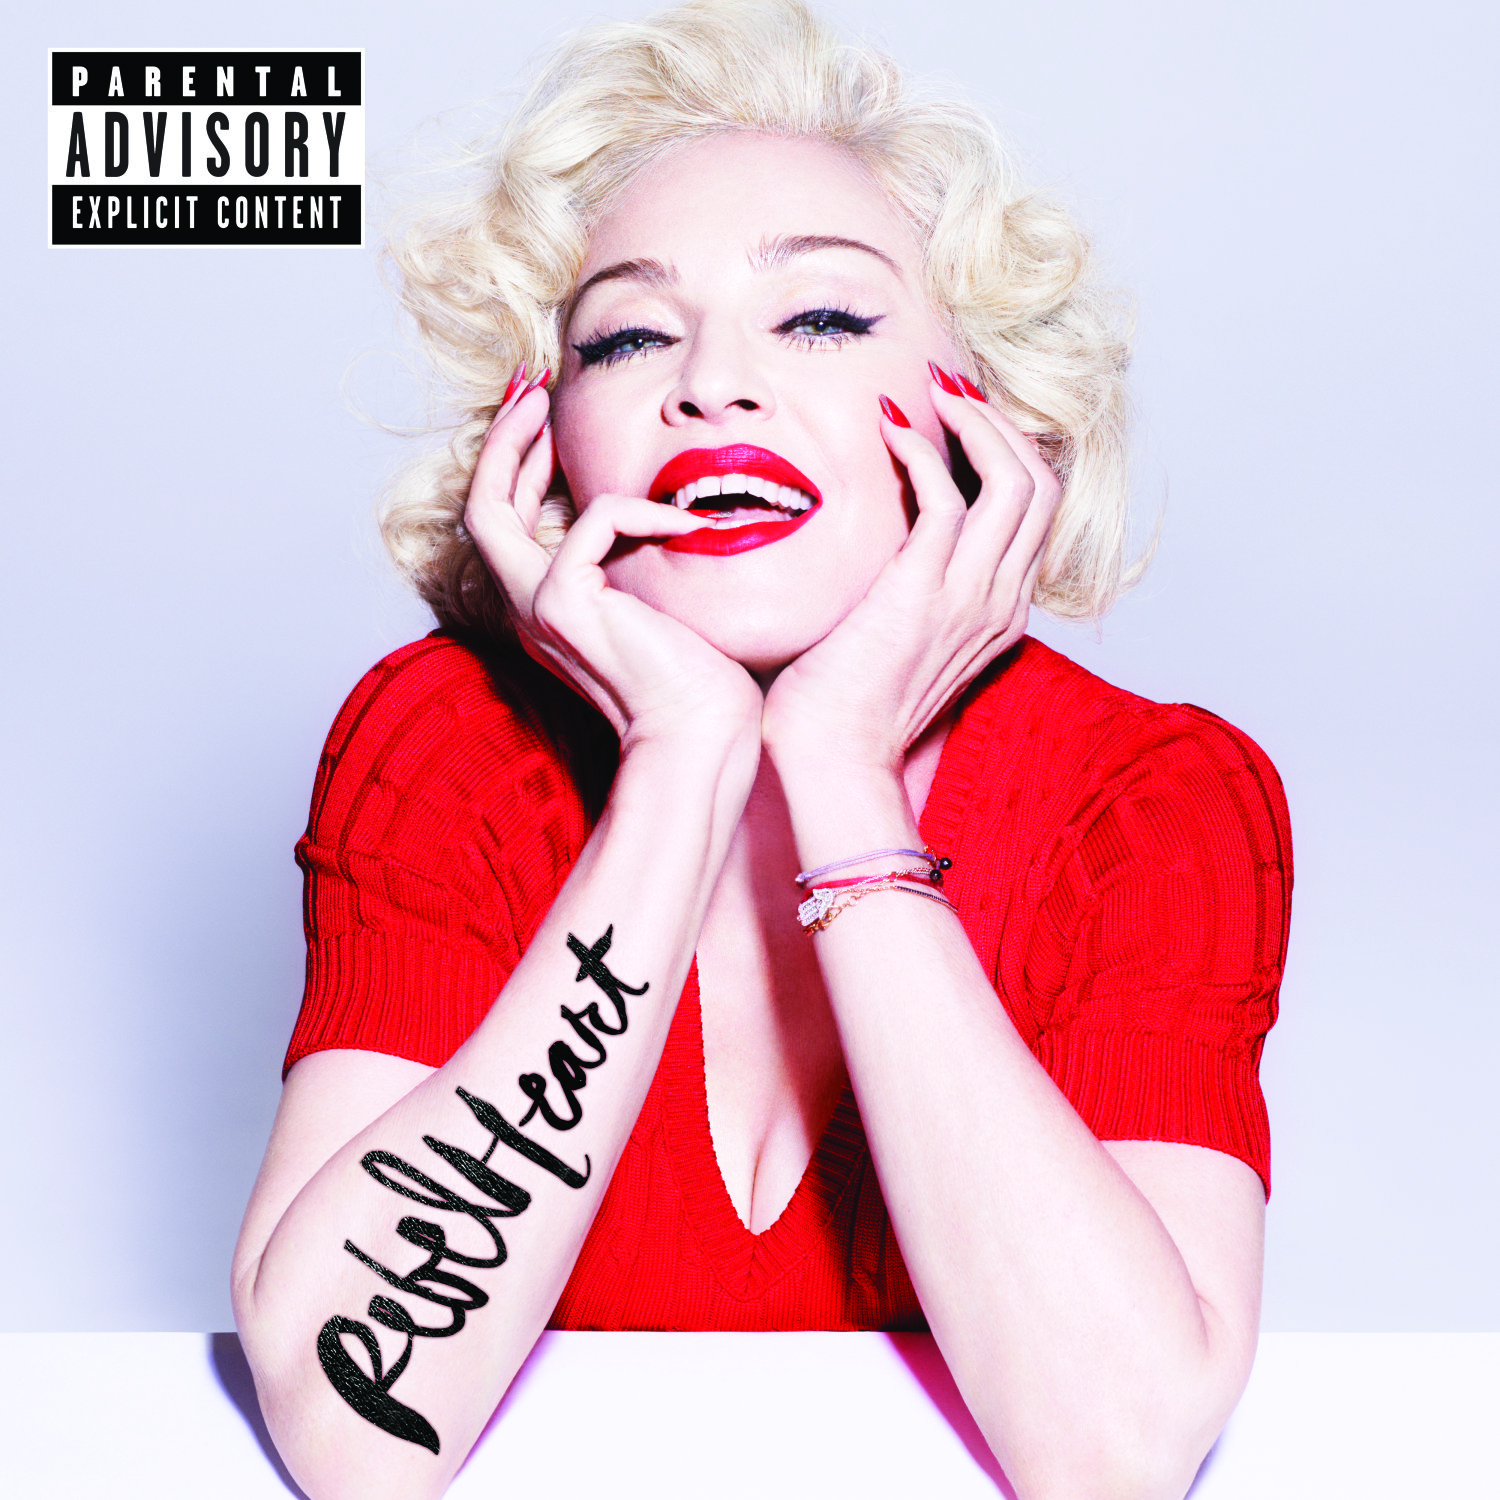 20150212-pictures-madonna-rebel-heart-covers-hq-standard.jpg